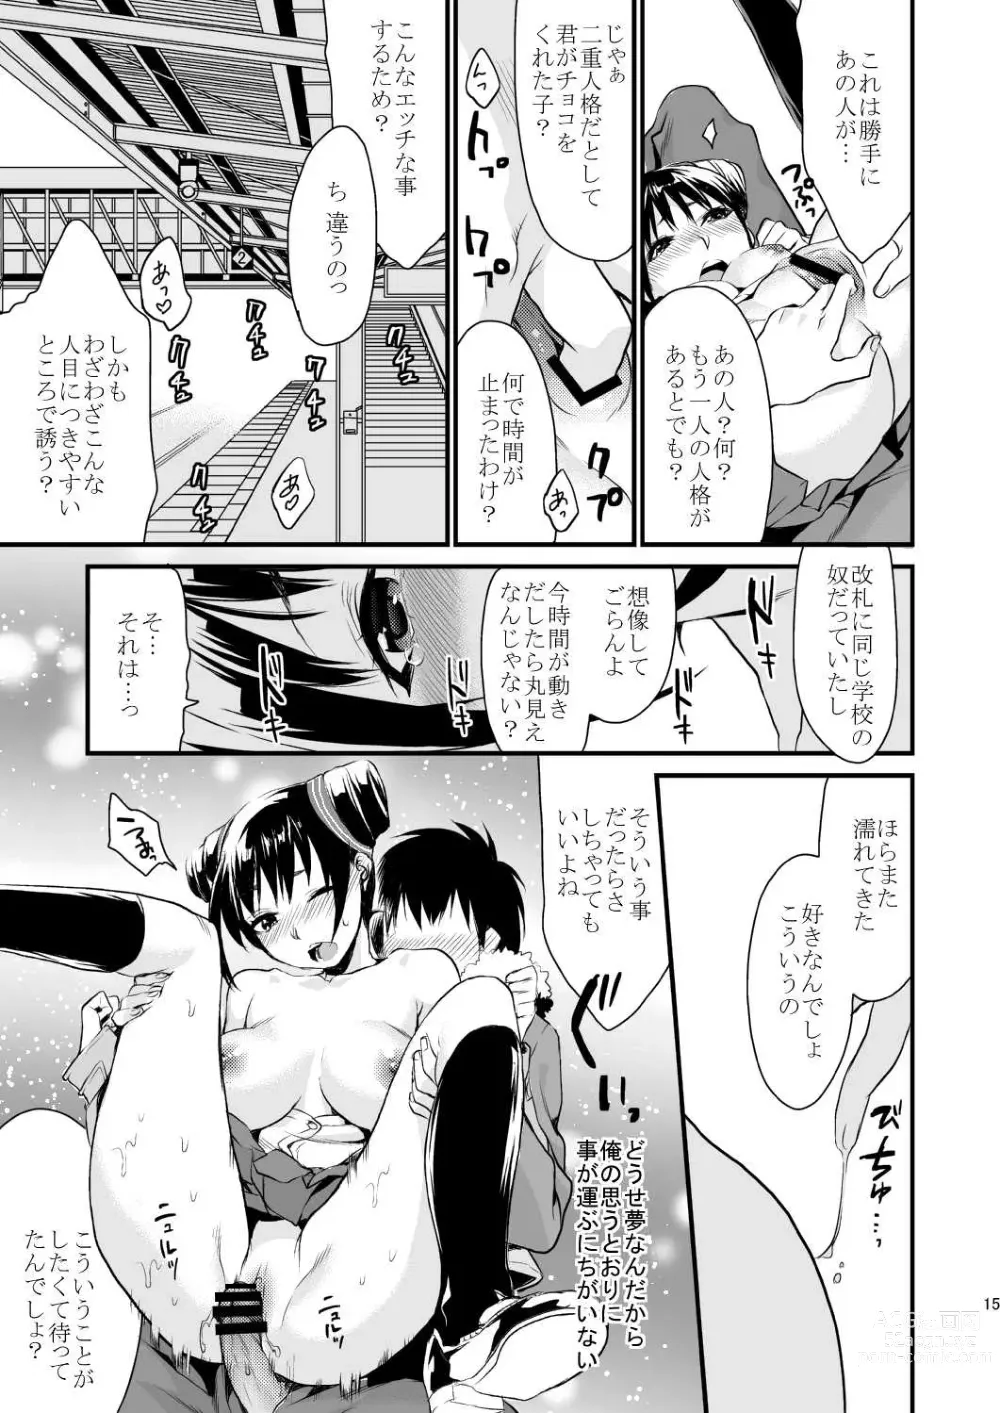 Page 14 of doujinshi Decorate